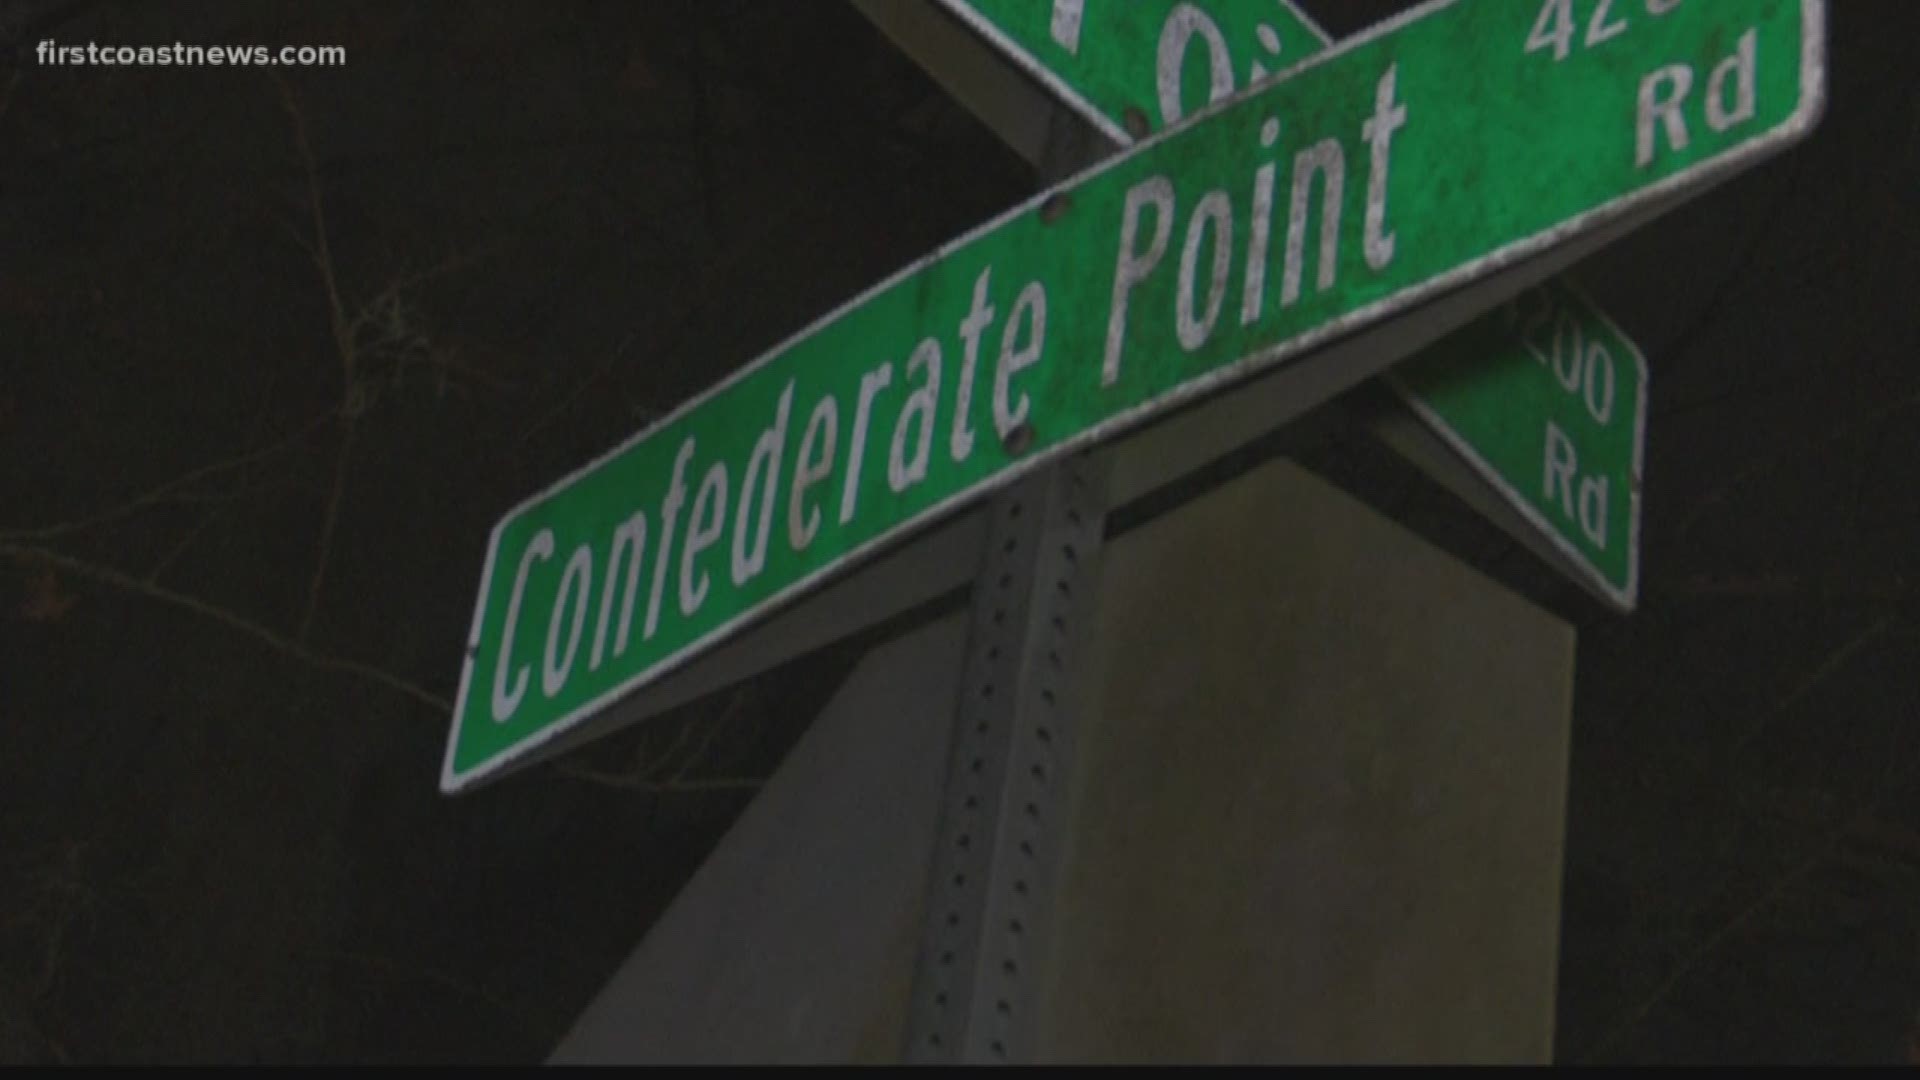 The death was reported in the 4300 block of Confederate Point Road.